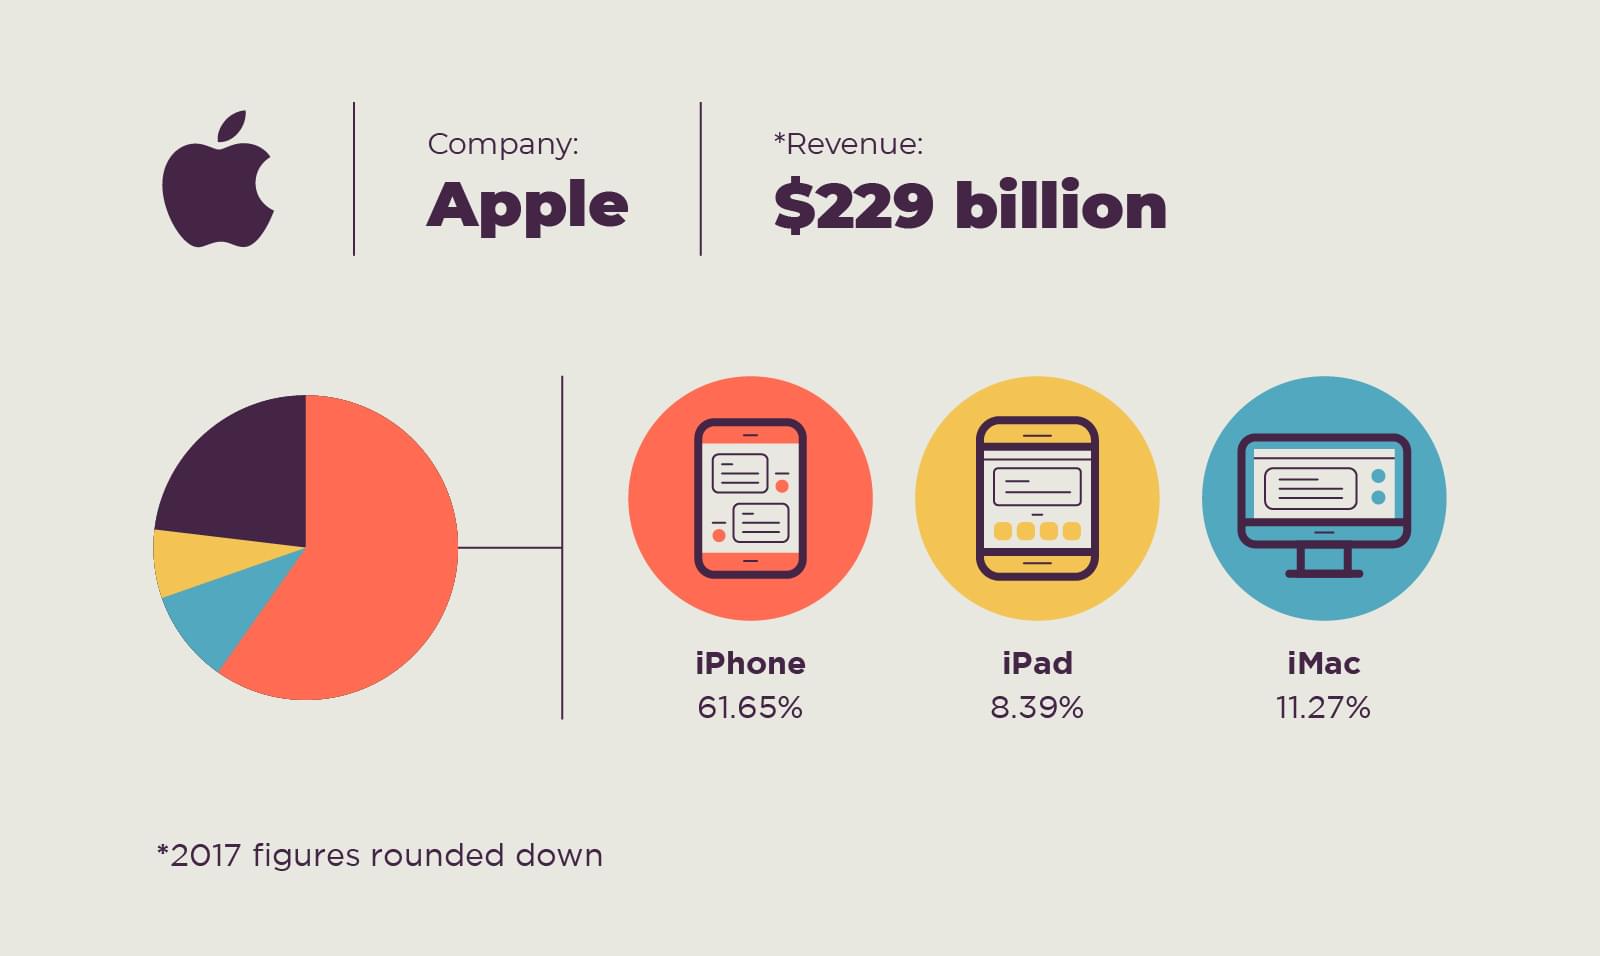 Apple iPhone carries the large majority of revenue